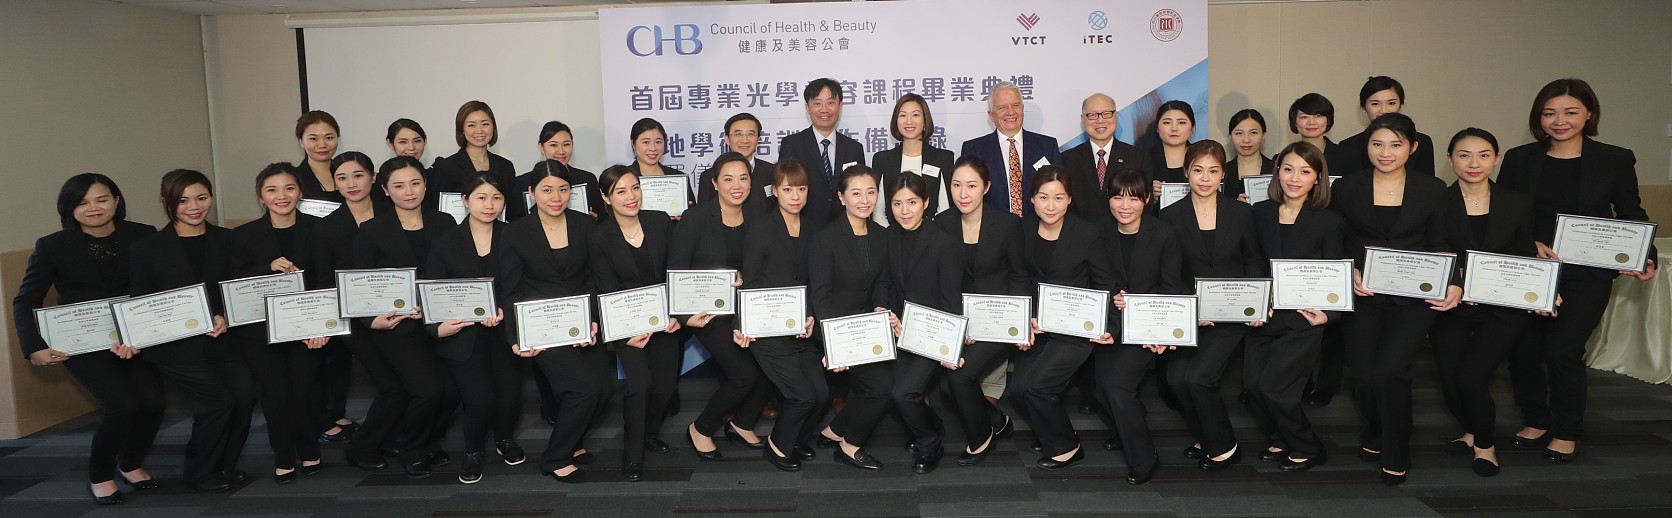 Council of Health and Beauty Limited  Professional Certificate in Cosmetic Light Therapy